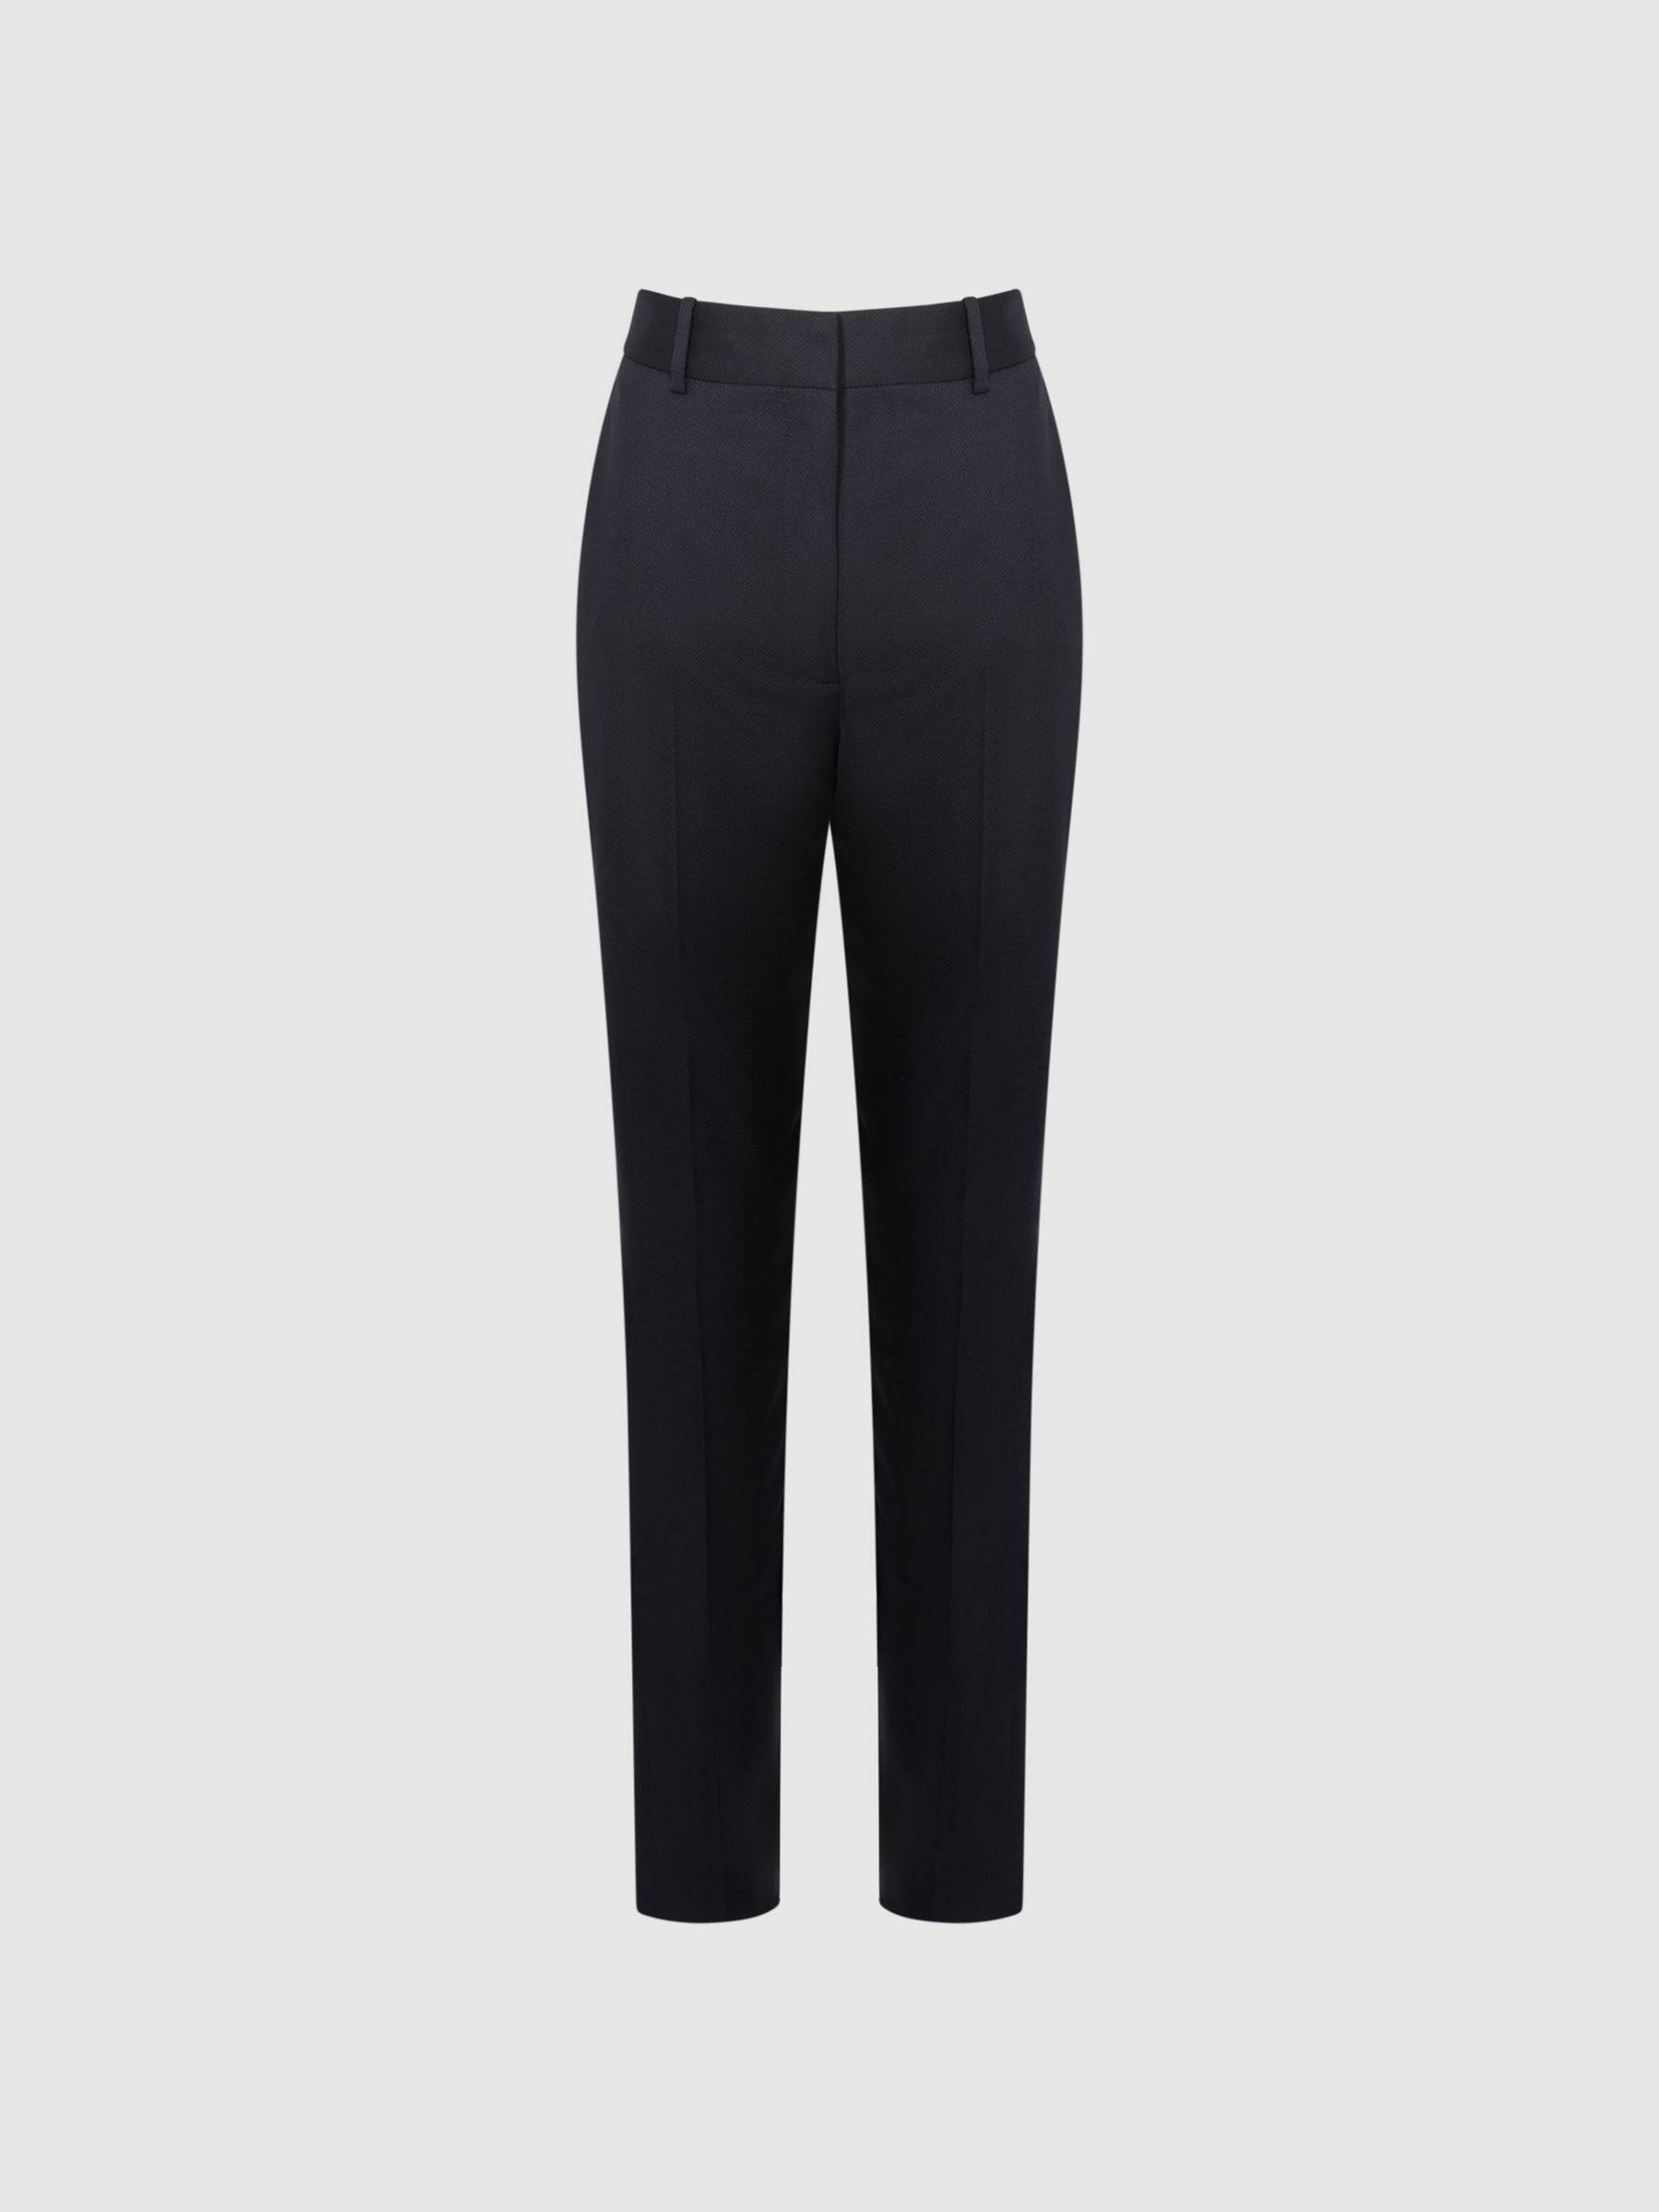 Reiss Haisley Wool Blend Tapered Suit Trousers - REISS